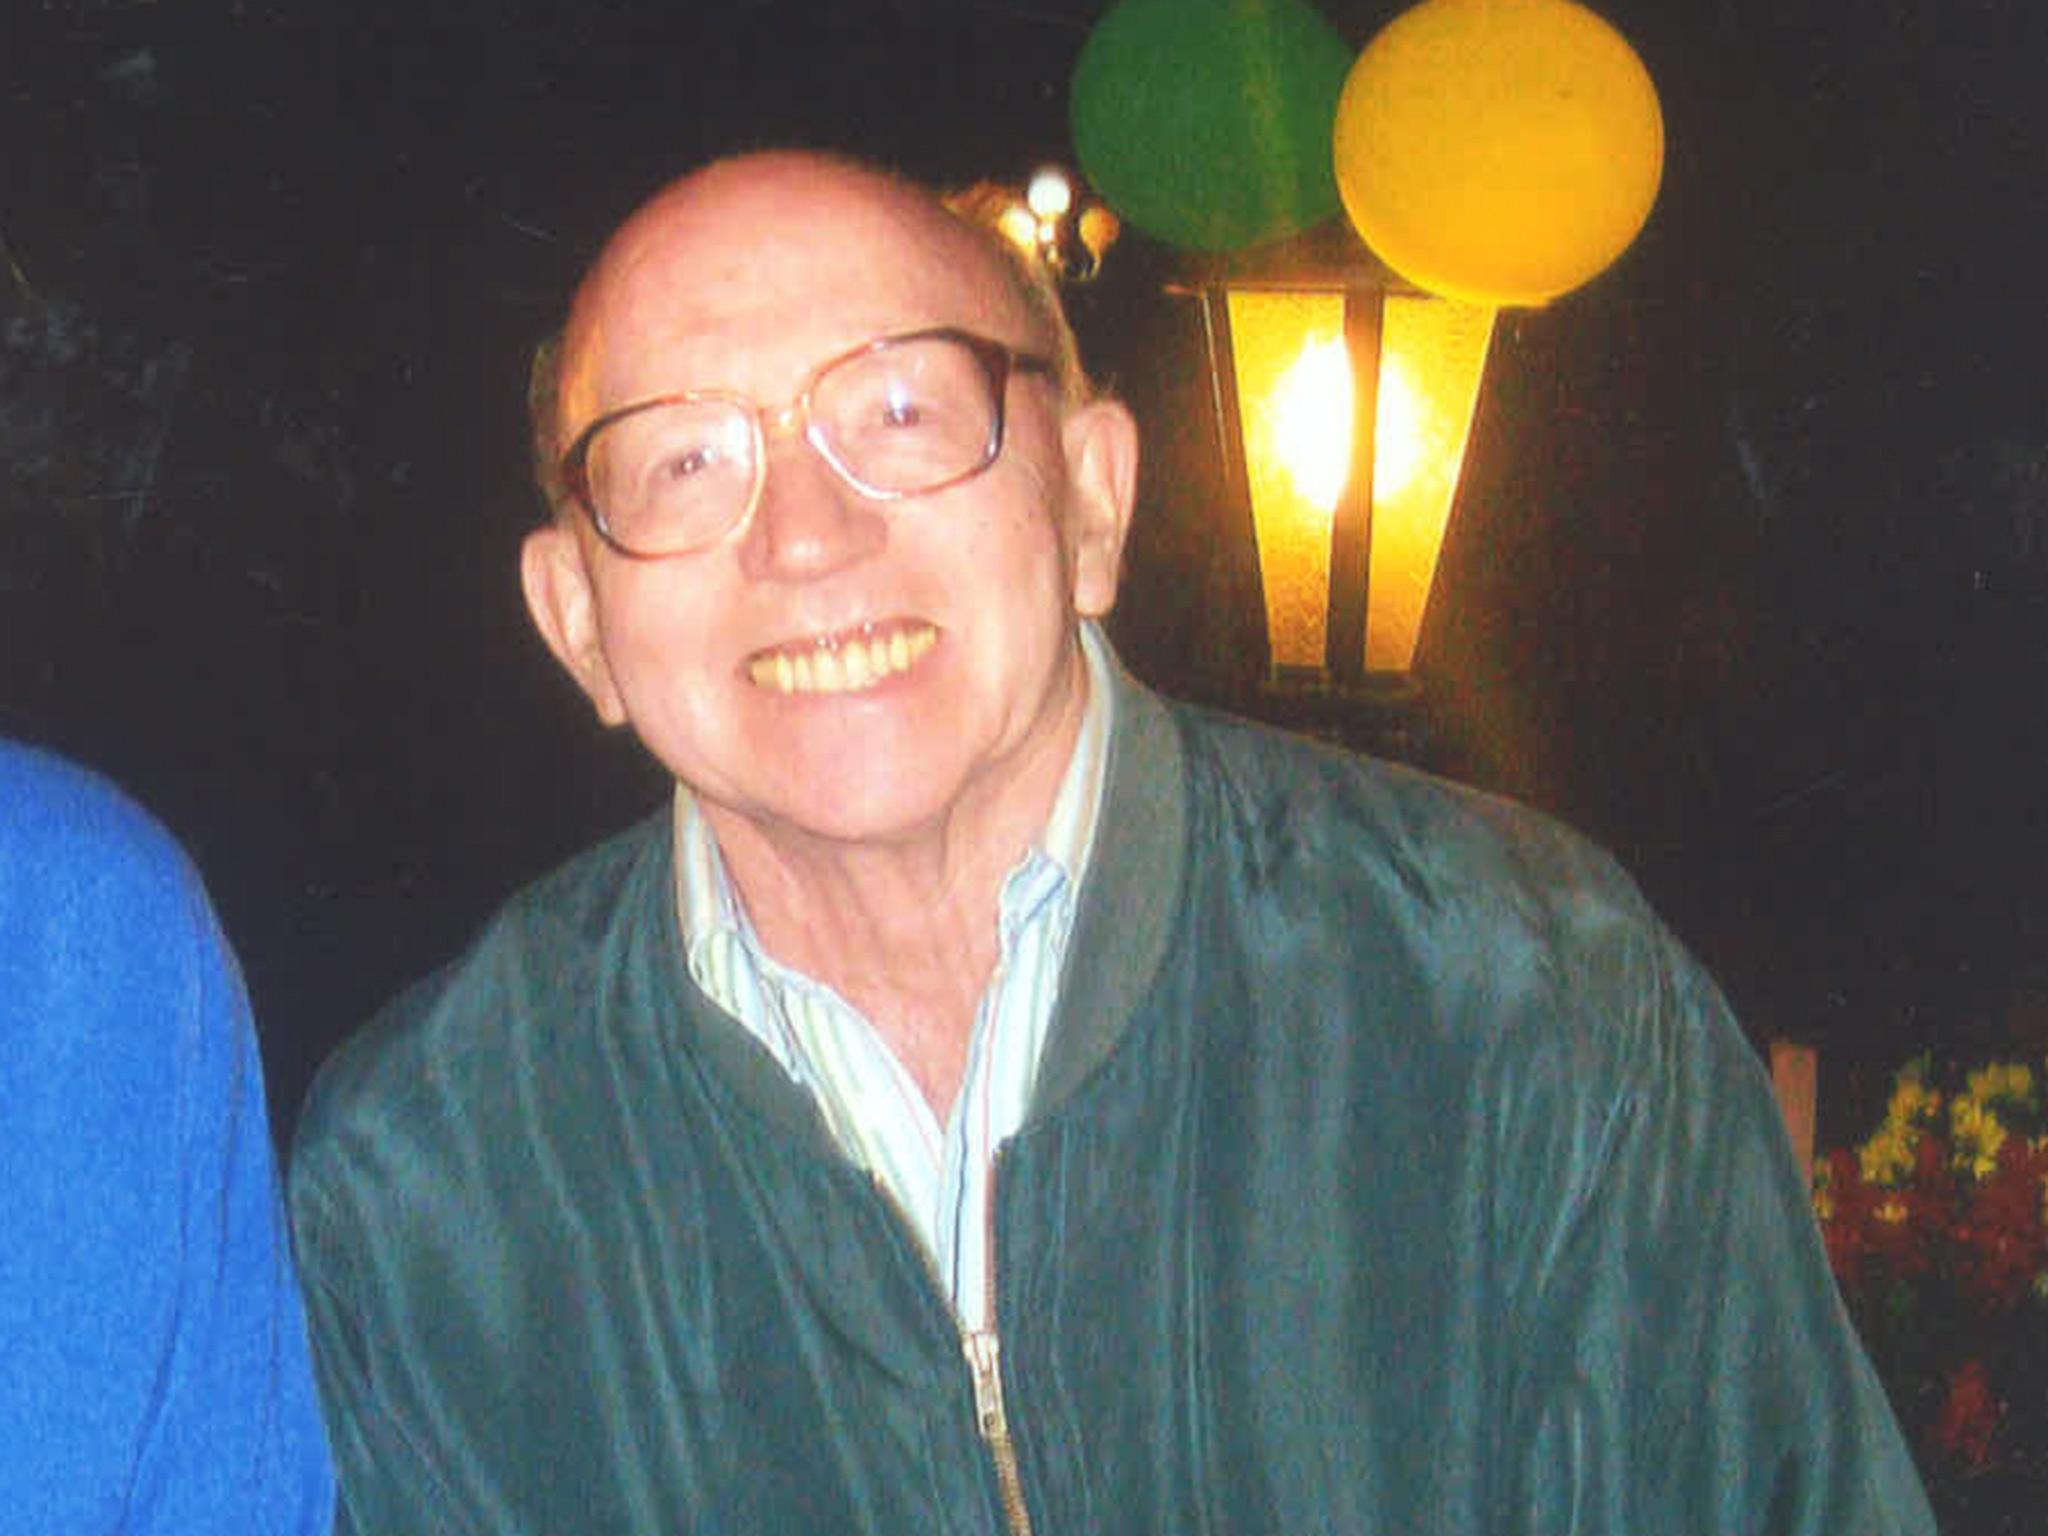 Alzheimer’s and vascular dementia have left the mind of Nobby Stiles frayed